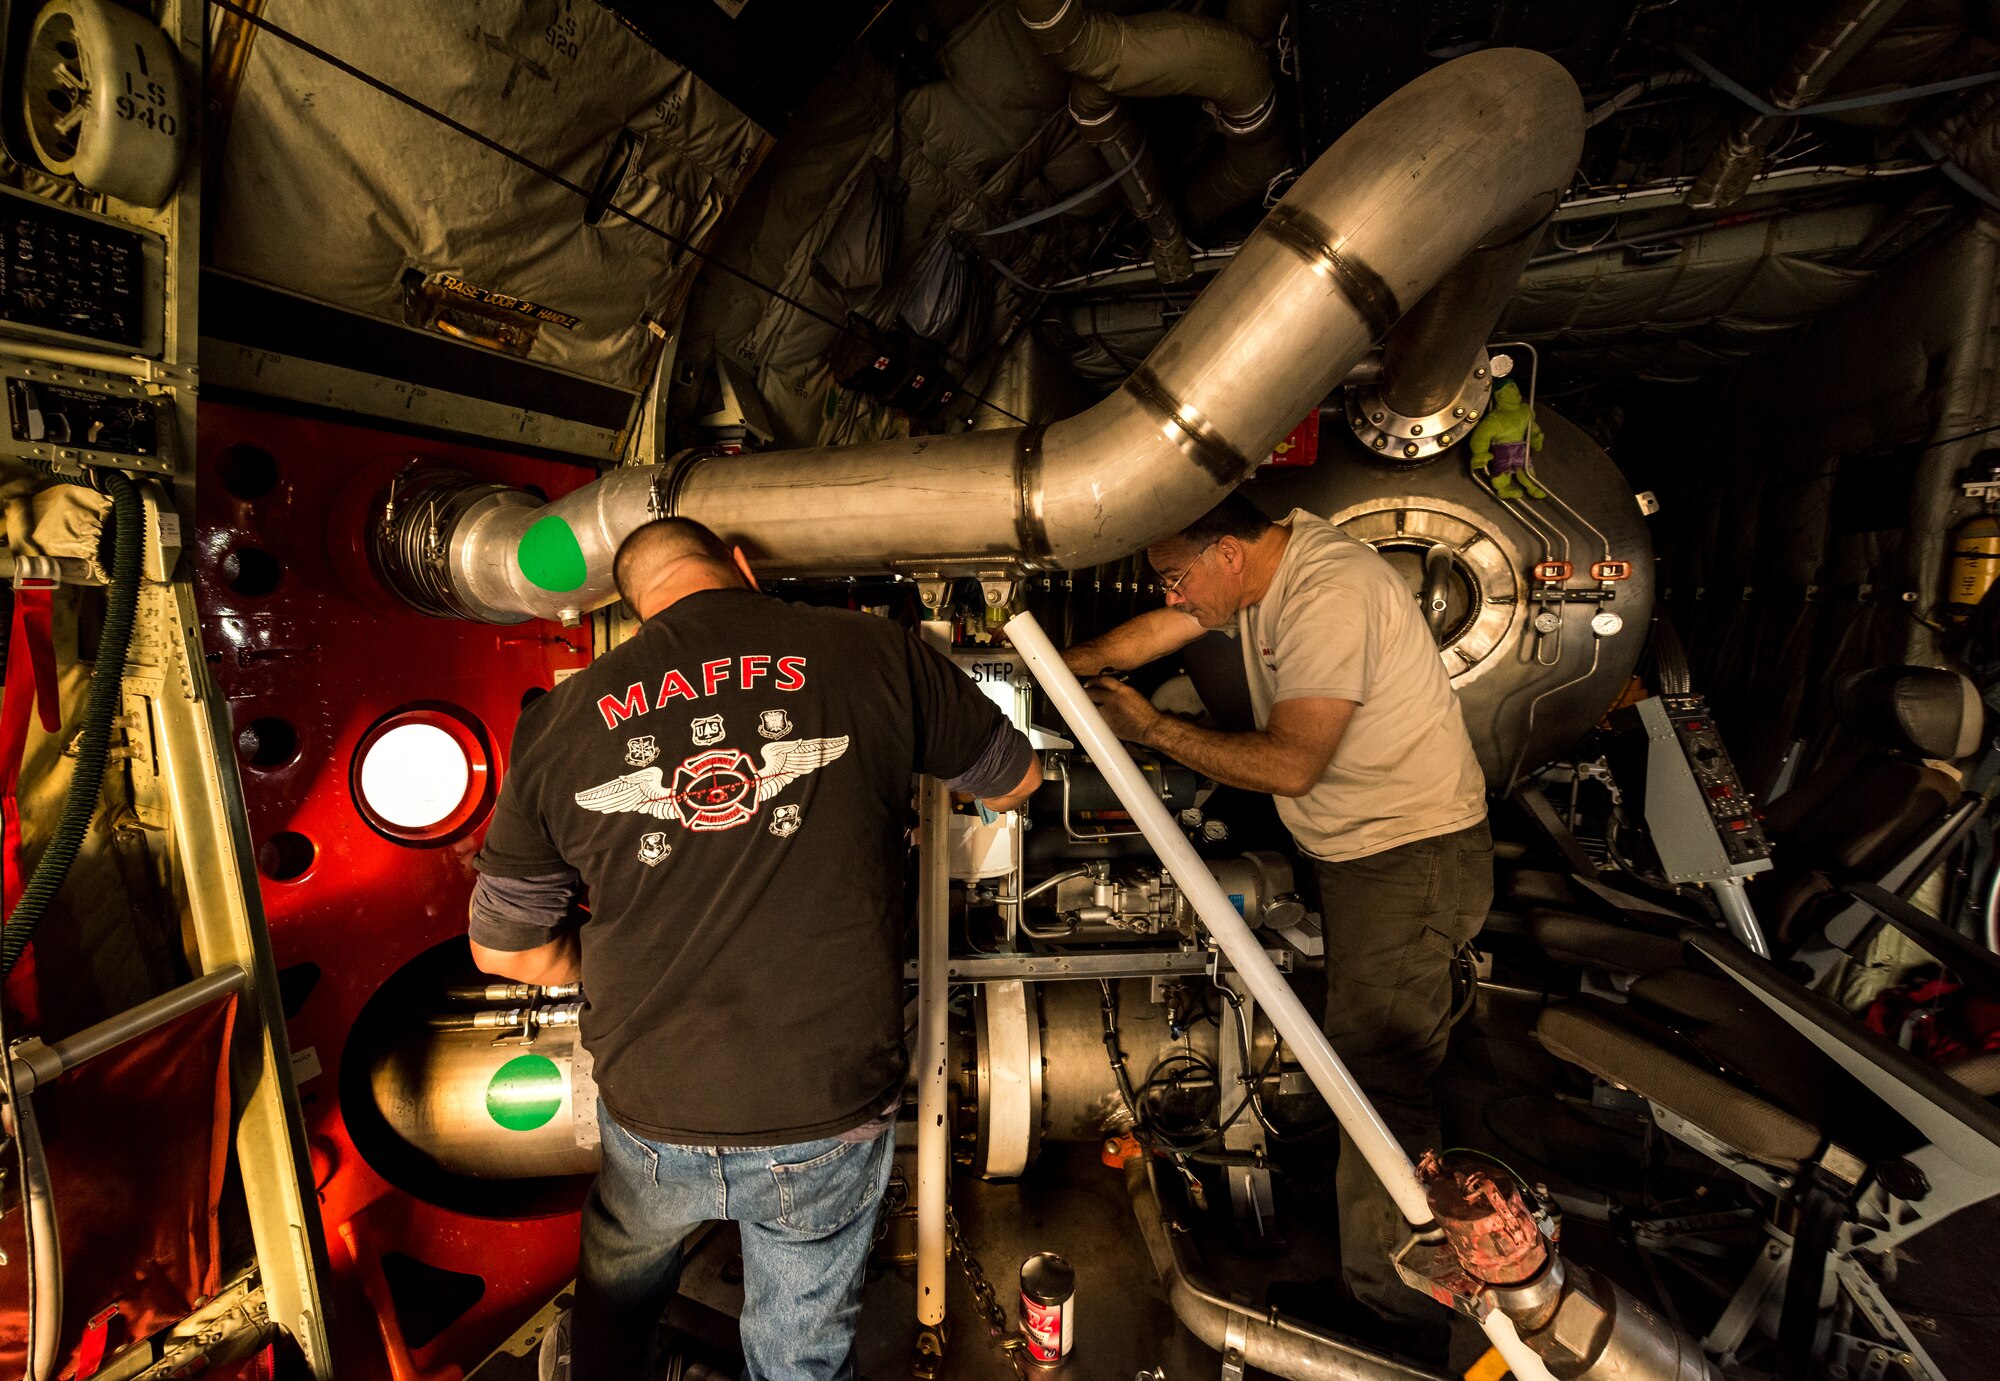 Technicians perform repairs on a Modular Airborne Fire Fighting System (MAFFS) in the cargo bay of a C-130J of the 146th Airlift Wing at Channel Islands Air National Guard Base in Port Hueneme, California, Dec. 9, 2017. The MAFFS units, which are owned by the U.S. Forestry Service, can be loaded and made ready for operations in about three hours. A mixture of water and fire-retardant chemicals is deployed through a nozzle attached to an orange door the replaces the paratroop door on the C-130J. (U.S. Air Force photo by J.M. Eddins Jr.)